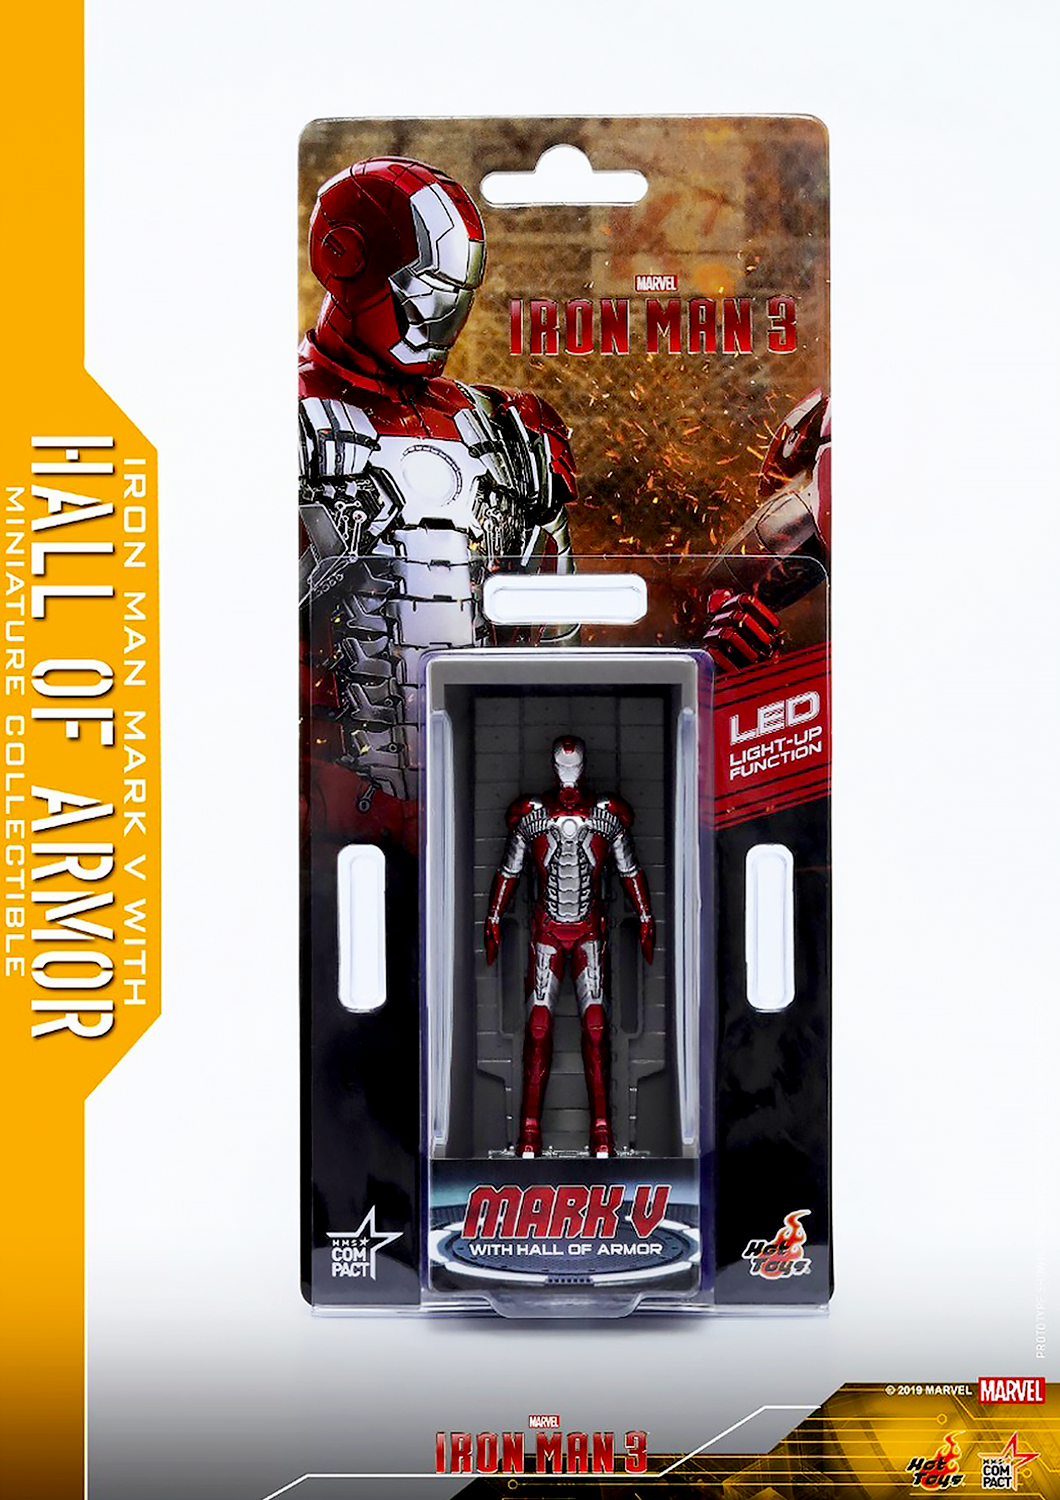 HOT TOYS MARVEL IRON MAN MARK V WITH HALL OF ARMOR MINIATURE COLLECTIBLE - MMSC009 - Anotoys Collectibles